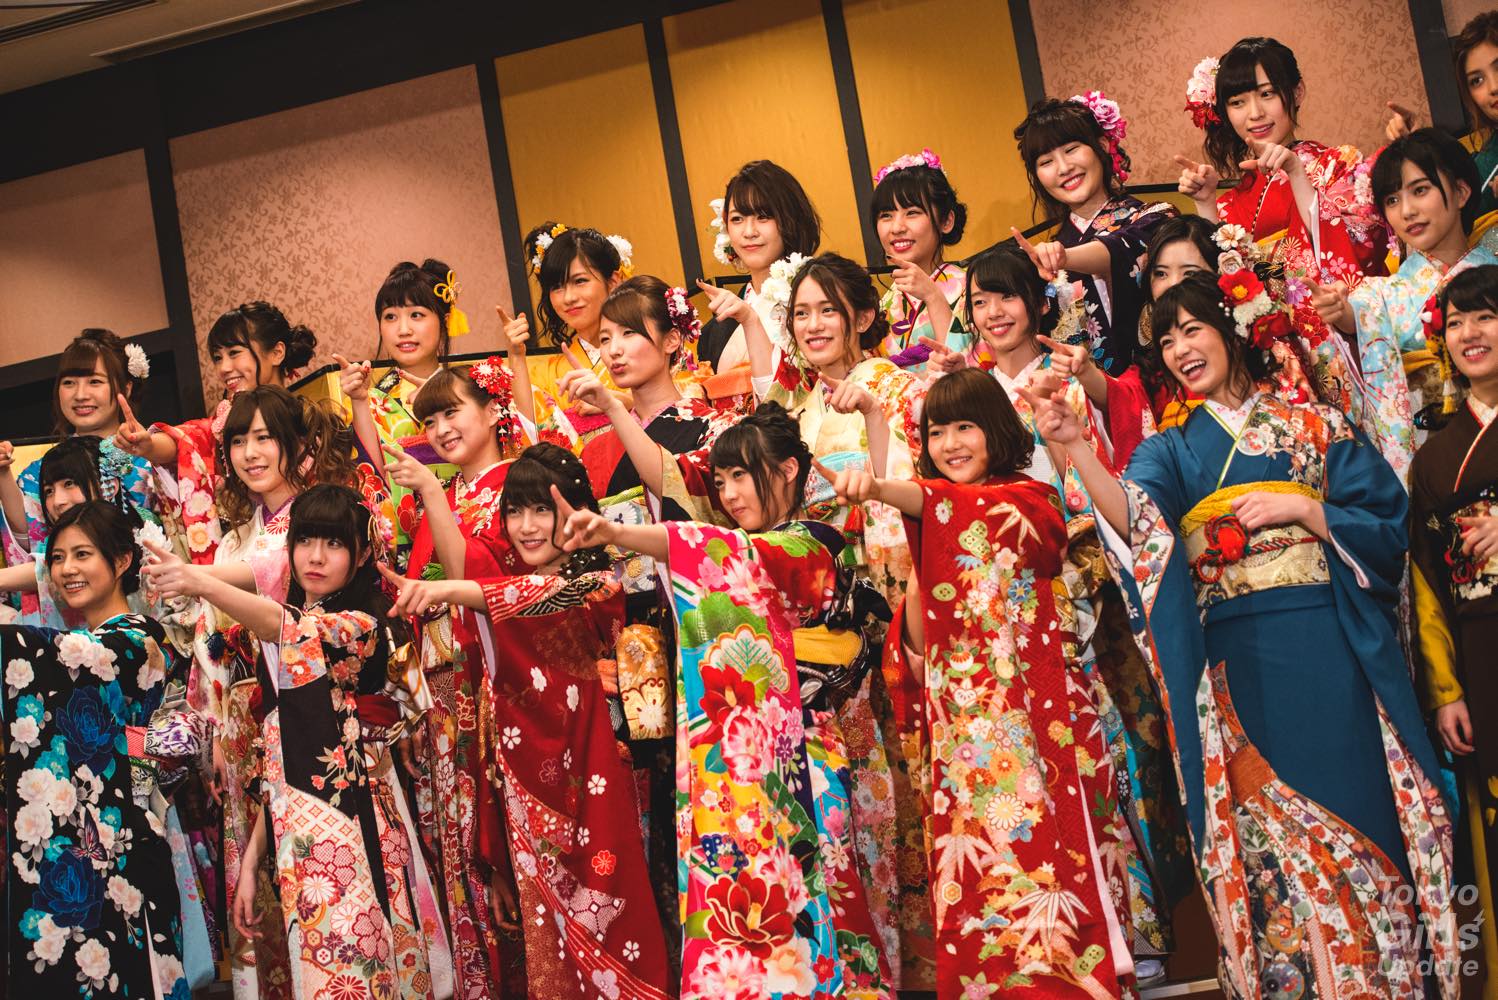 Exclusive Photo Report: AKB48 Group Coming of Age Ceremony 2016 at Kanda Myojin!